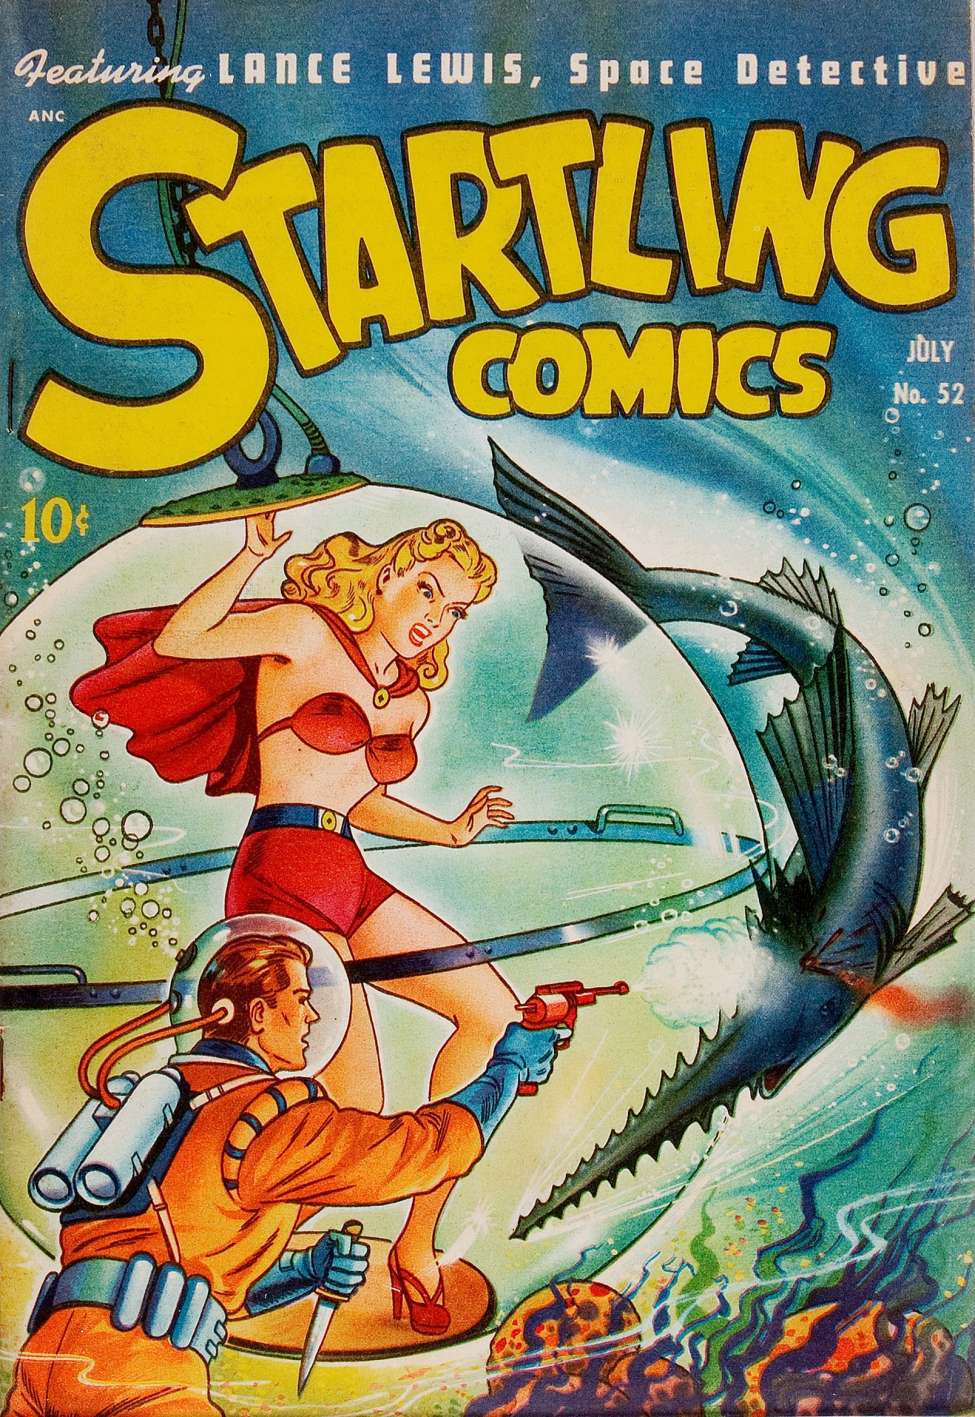 Book Cover For Startling Comics 52